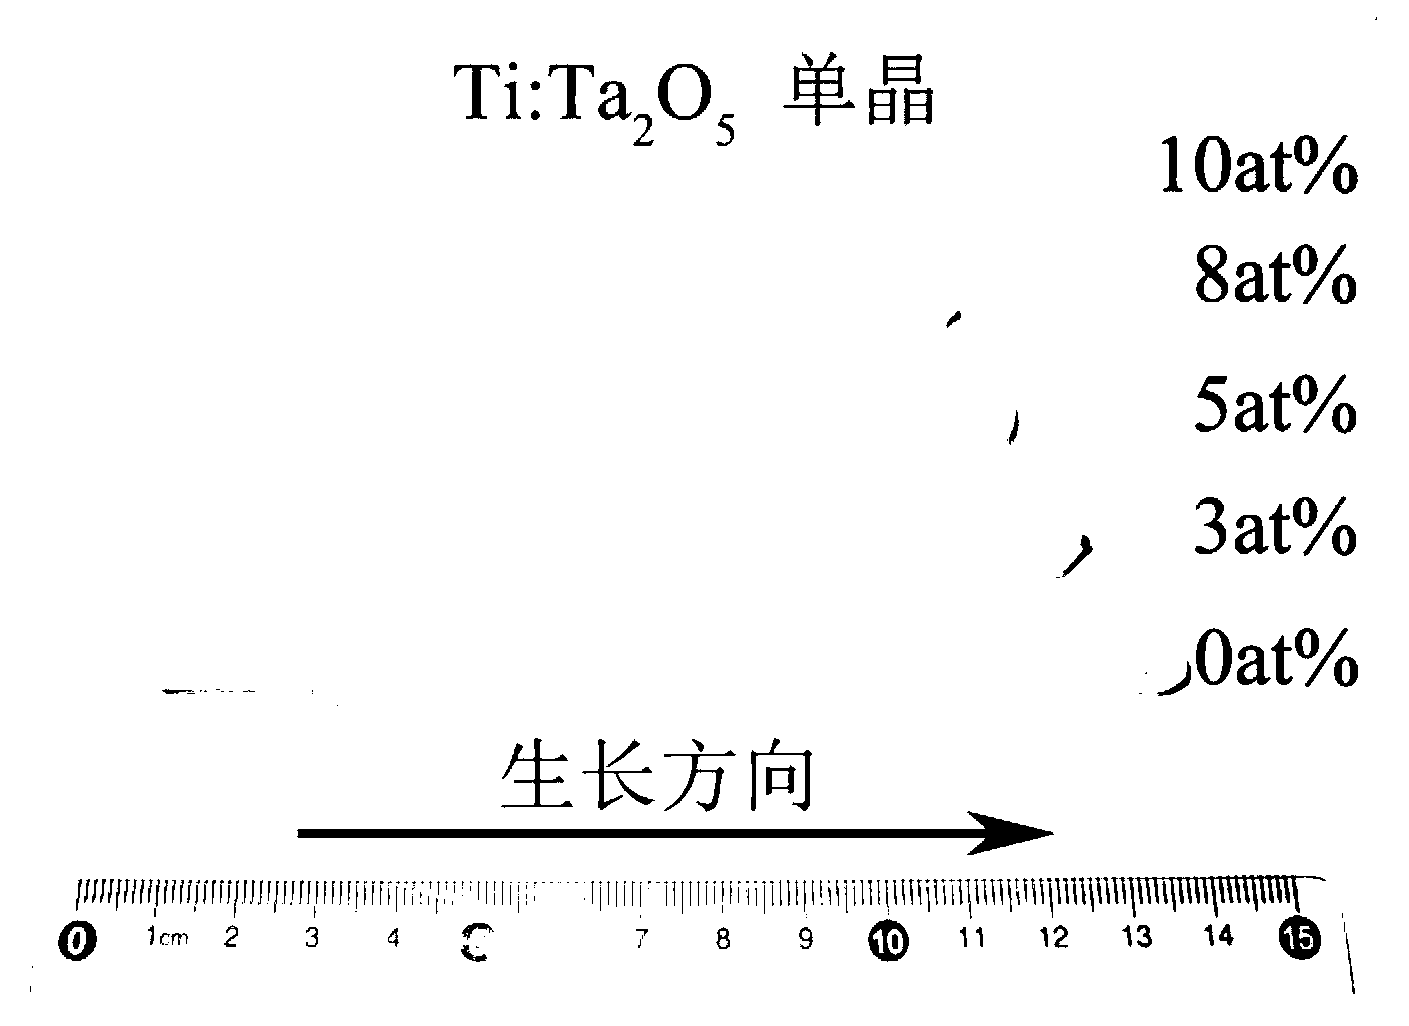 Method for crucible-free rapid growth of centimeter magnitude Ti:Ta2O5 crystals